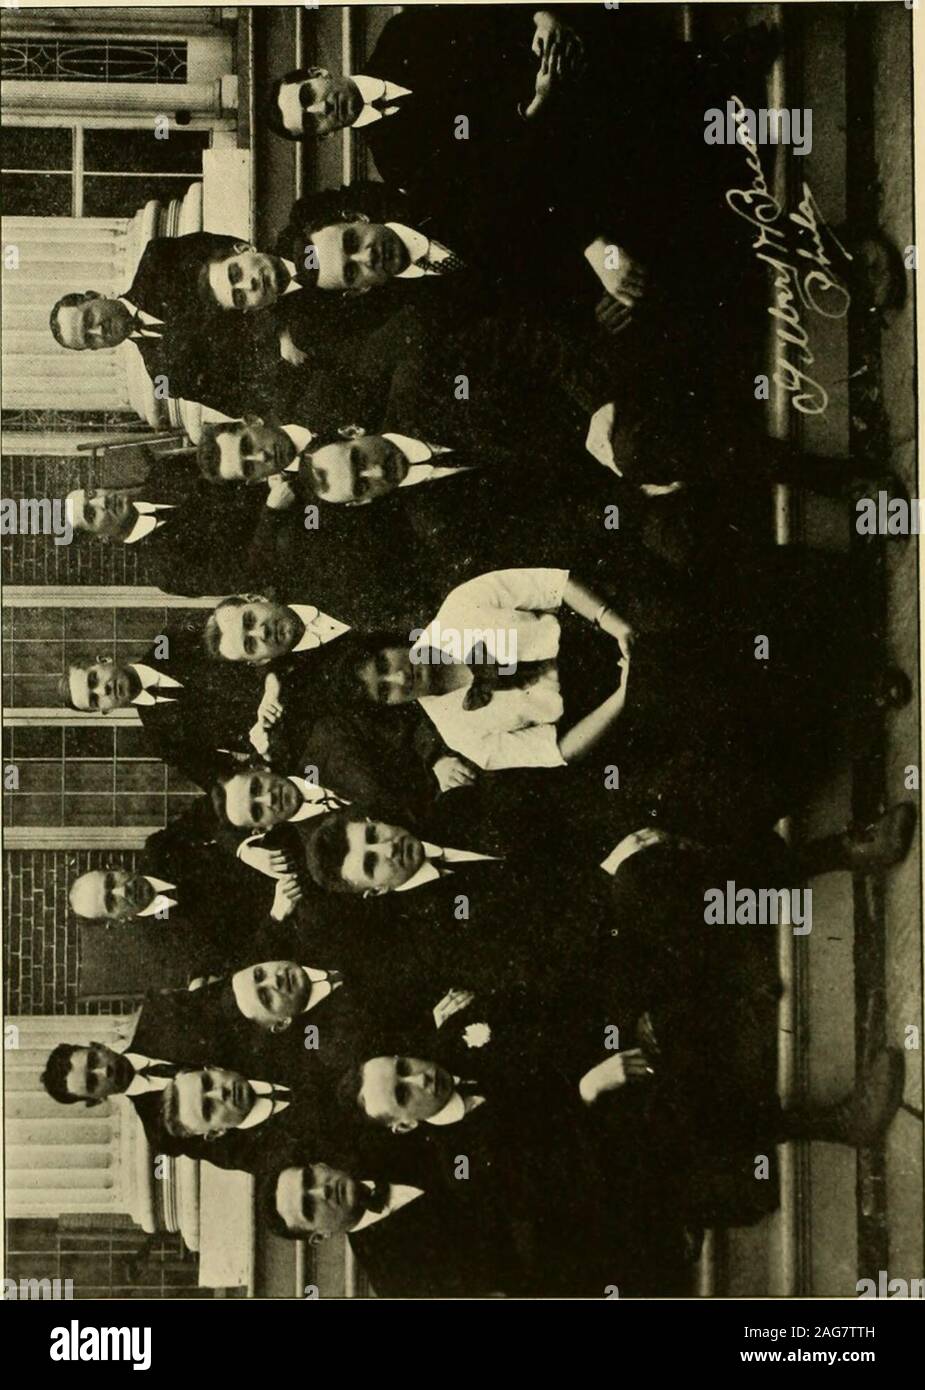 . The Lanthorn 1917. SEMINARY FACULTY Pres. Chas. T. Aikens, D. D. H. N. Follmer, D. D. Dean Frank P. Manhart, D. D. D. B. Floyd, D. D. Rev. Charles Leonard. SEMINARY OFFICERS President ------------- c. W. Shaeffer Vice President ------- ... j  g Kniseley Secretary ............. J p Harkins Treasurer -------------- A. W. Smith SEMINARY STUDENTS SEXIOR.S J. B. Kniseley C. W. Shaeffer R. L. LUBOLDMIDDLERS P. H. Kiniorts Roy Meyer B. A. Peters Clay Bergstresser H. W. Miller A. W. Smith JUNIORS J. F. Harkins Guy H. Middlesworth L. G. Shannon W. P. Ard VV. E. Brown Fred Crossland Fred Greninger Joh Stock Photo